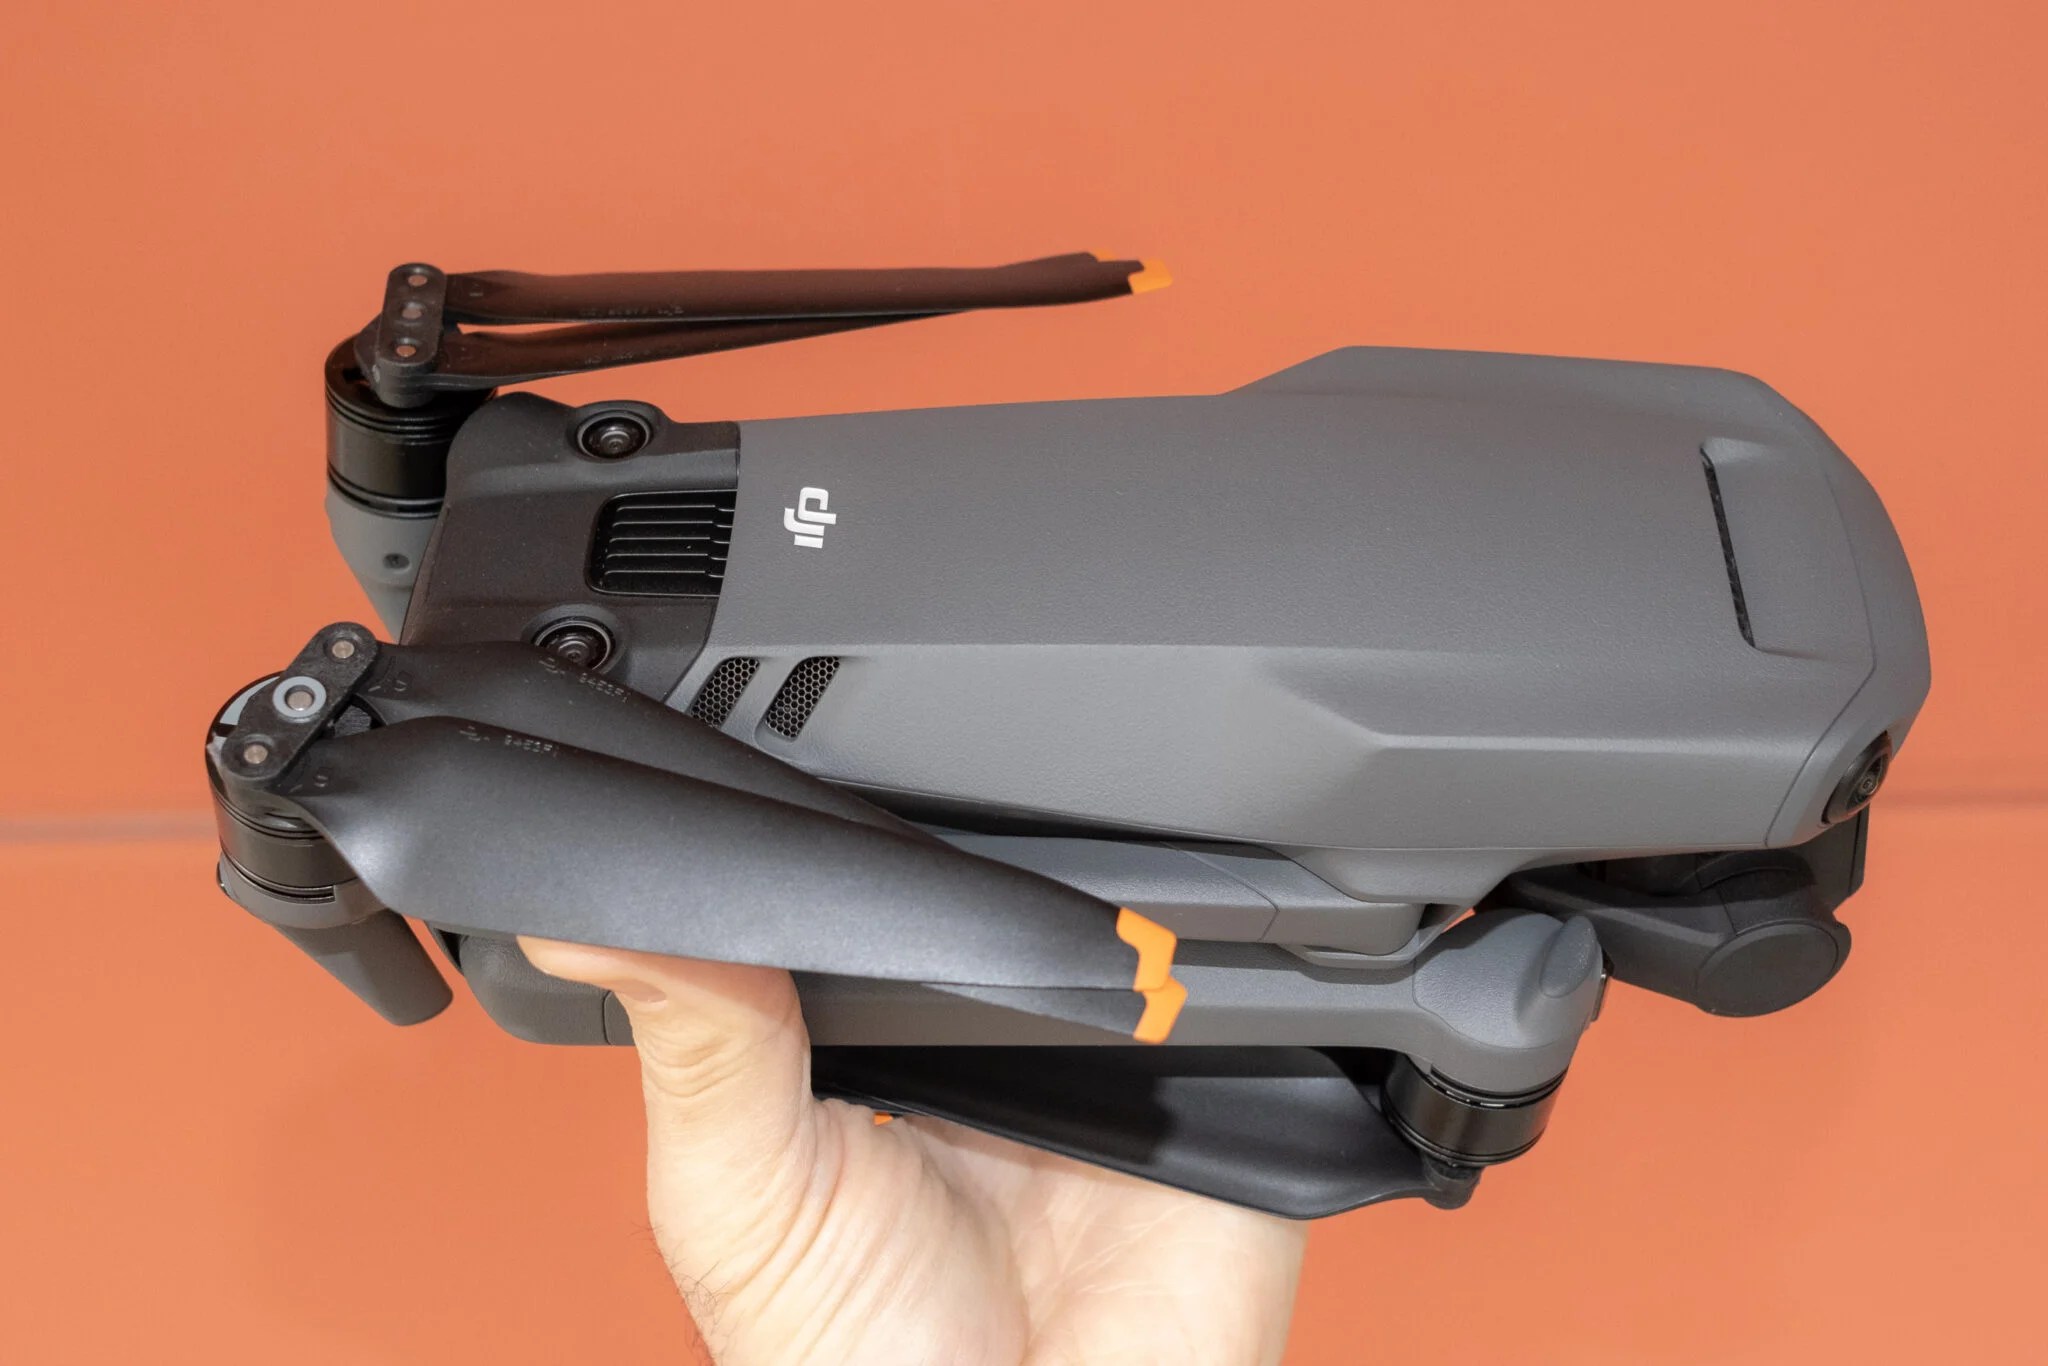 Unboxing Potensic's new Atom SE sub-250 drone